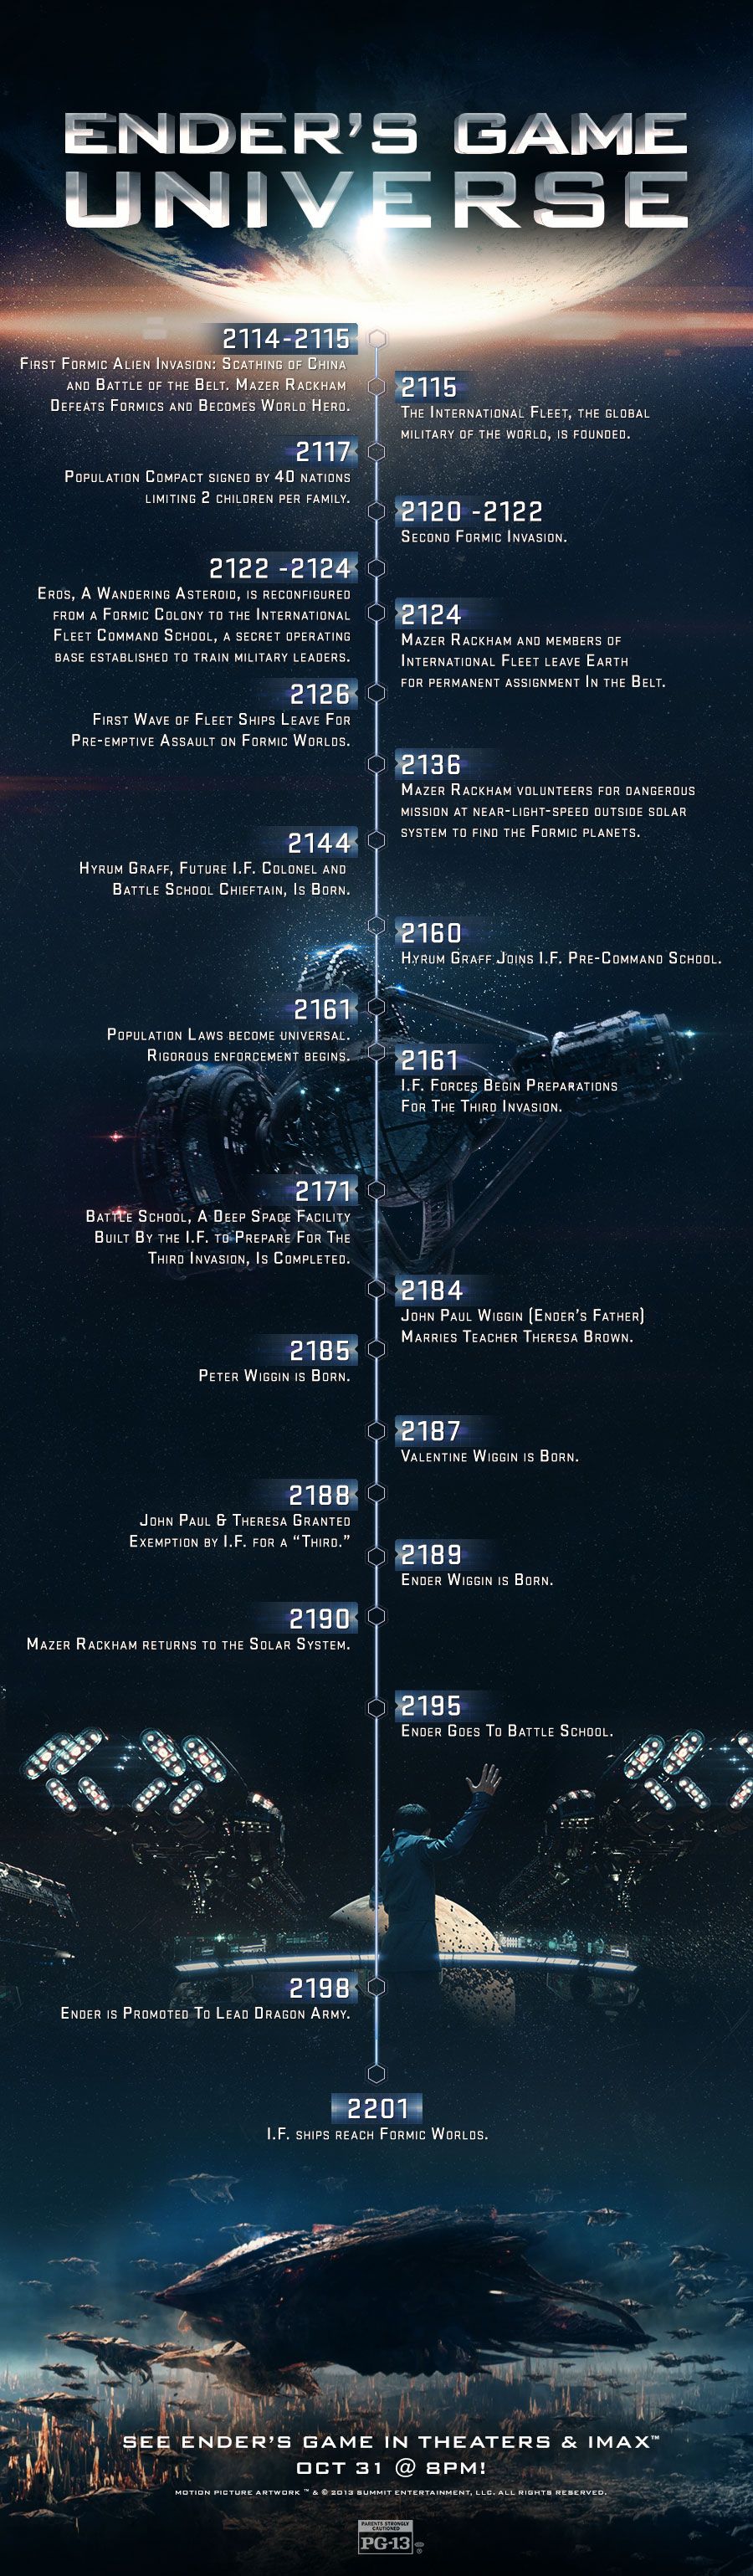 Ender's Game Universe Infographic